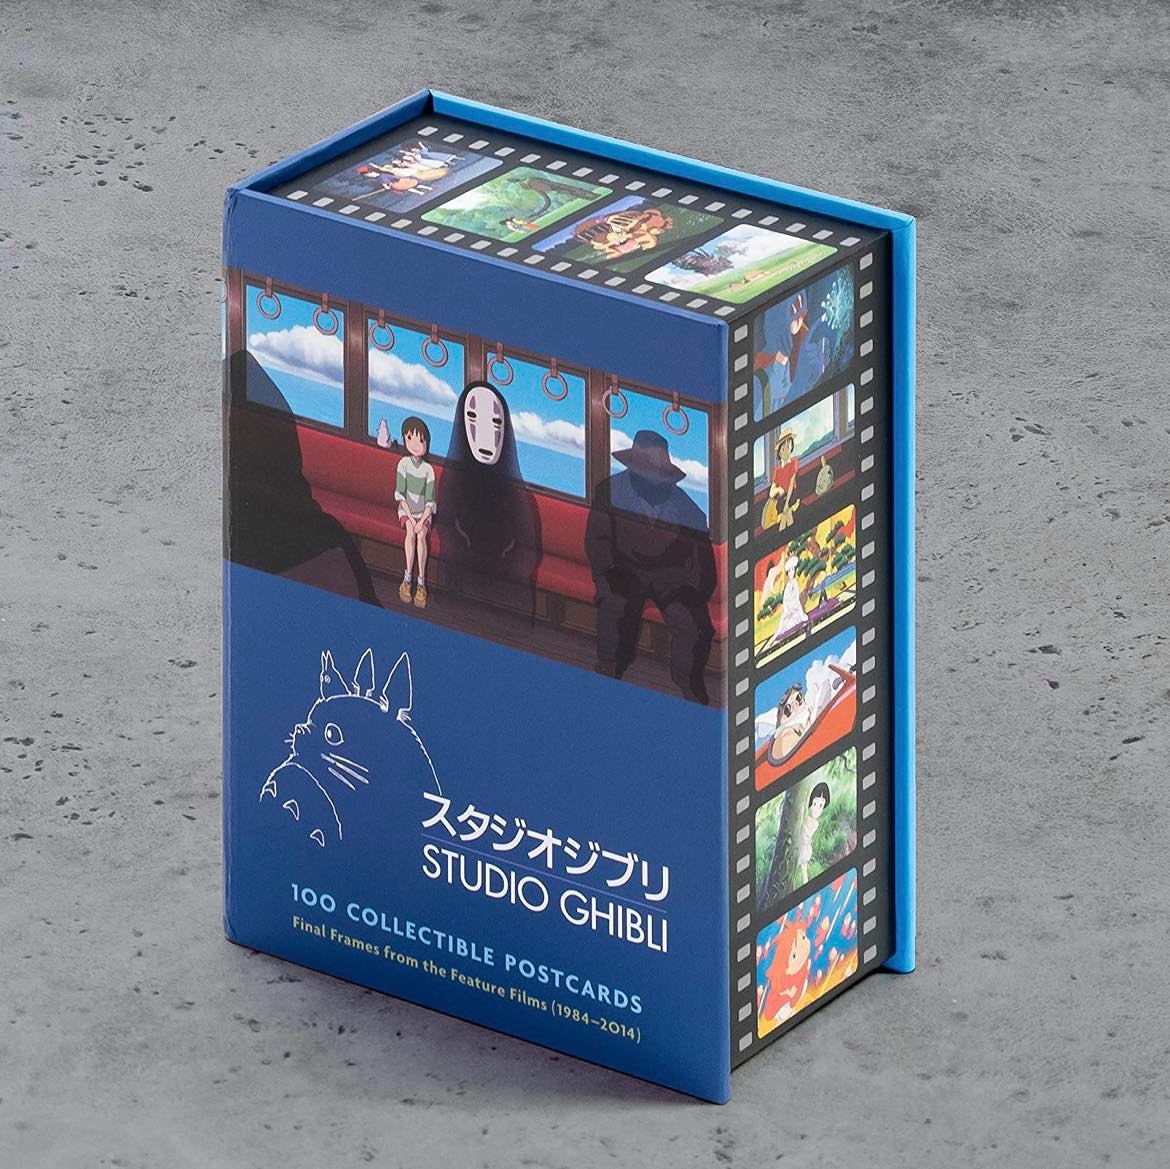 Studio Ghibli: 100 Collectible Postcards: Final Frames from the Featur - de  Young & Legion of Honor Museum Stores